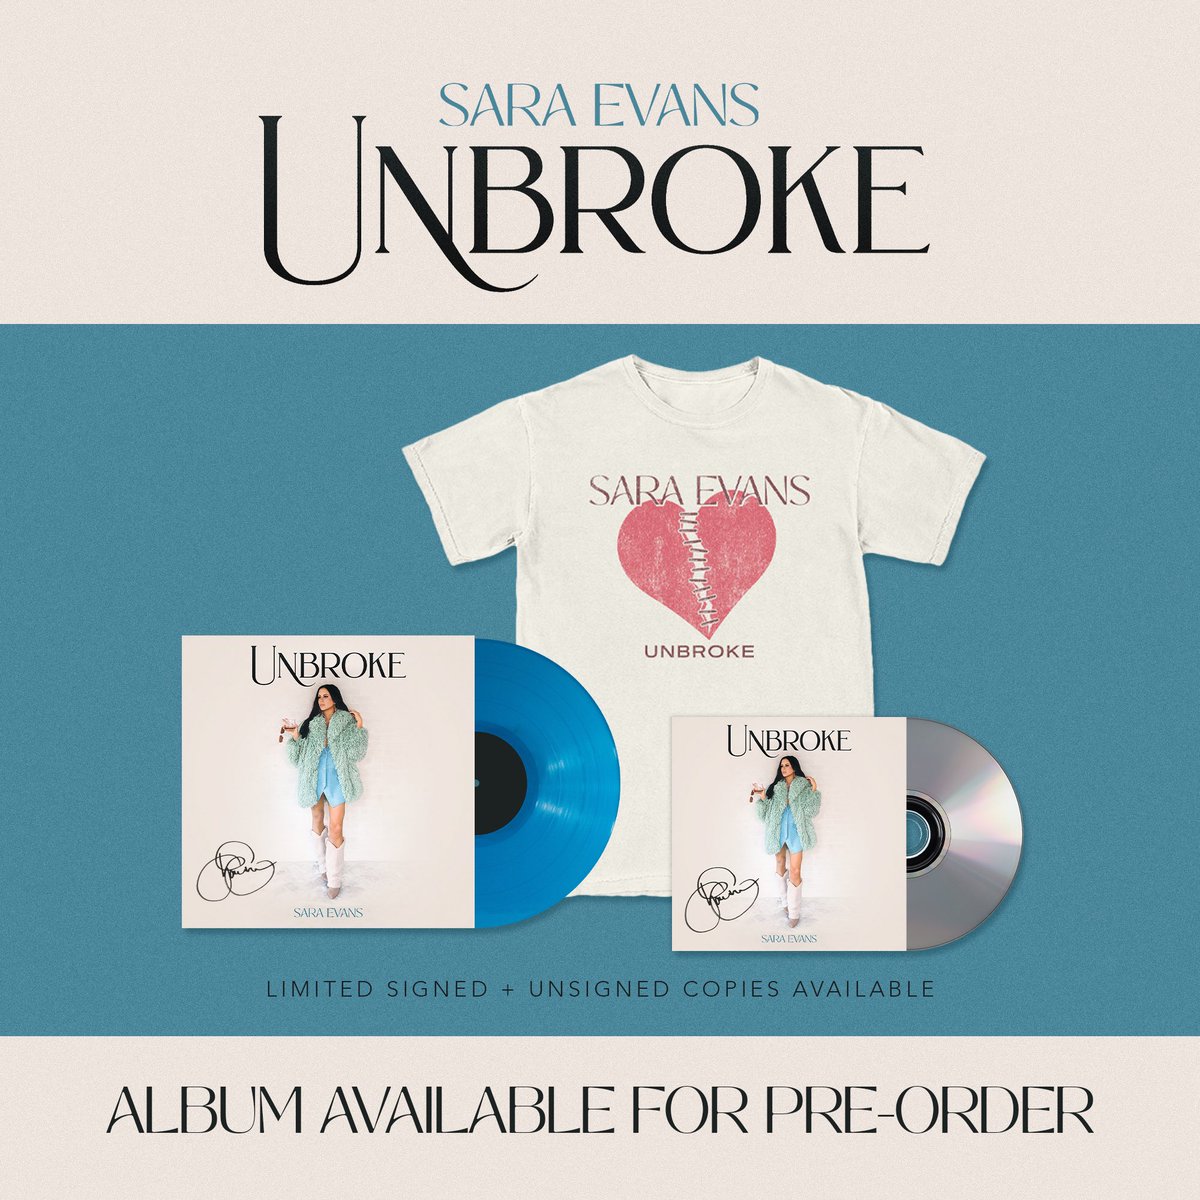 LIMITED SIGNED COPIES AVAILABLE 💙 Make sure to get your pre-orders in for my new album, Unbroke — out June 7th!! Pre-order/pre-save now at ffm.to/seunbroke